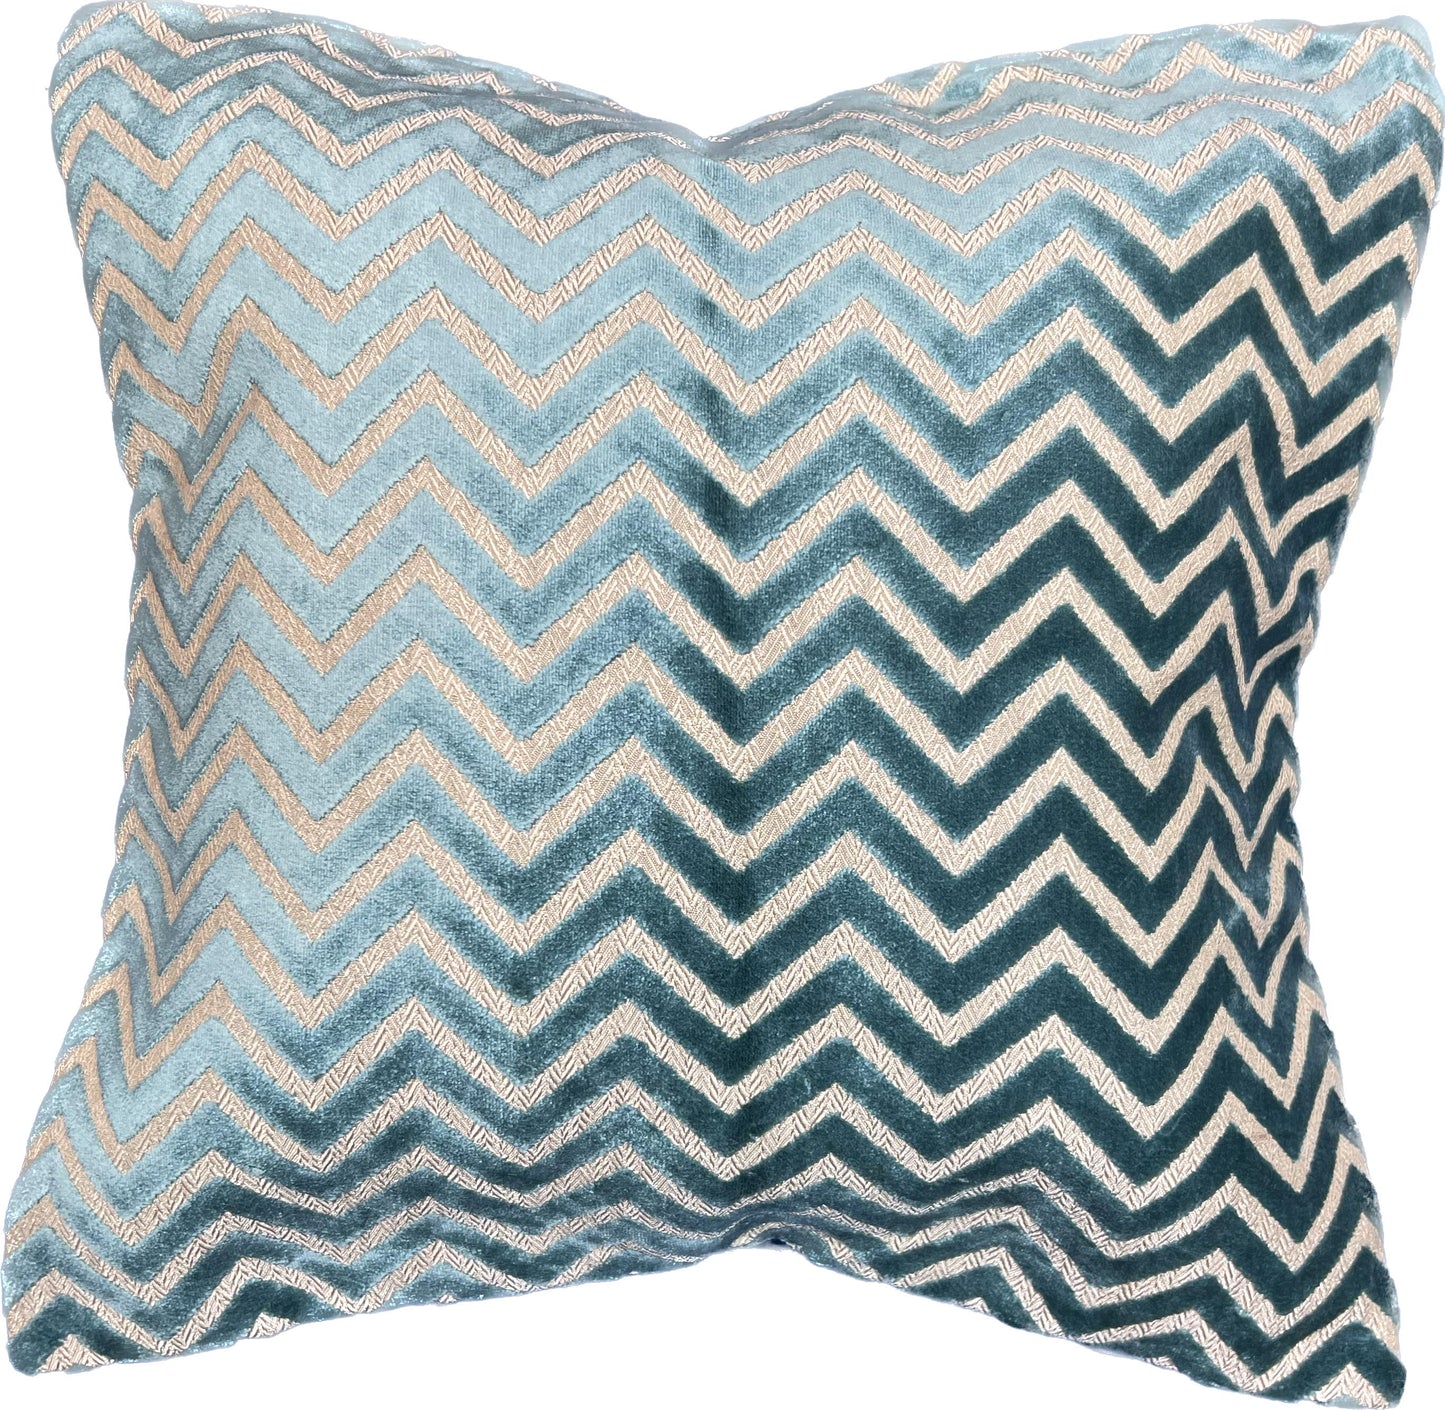 18"x18"  Wave Design Pillow Cover